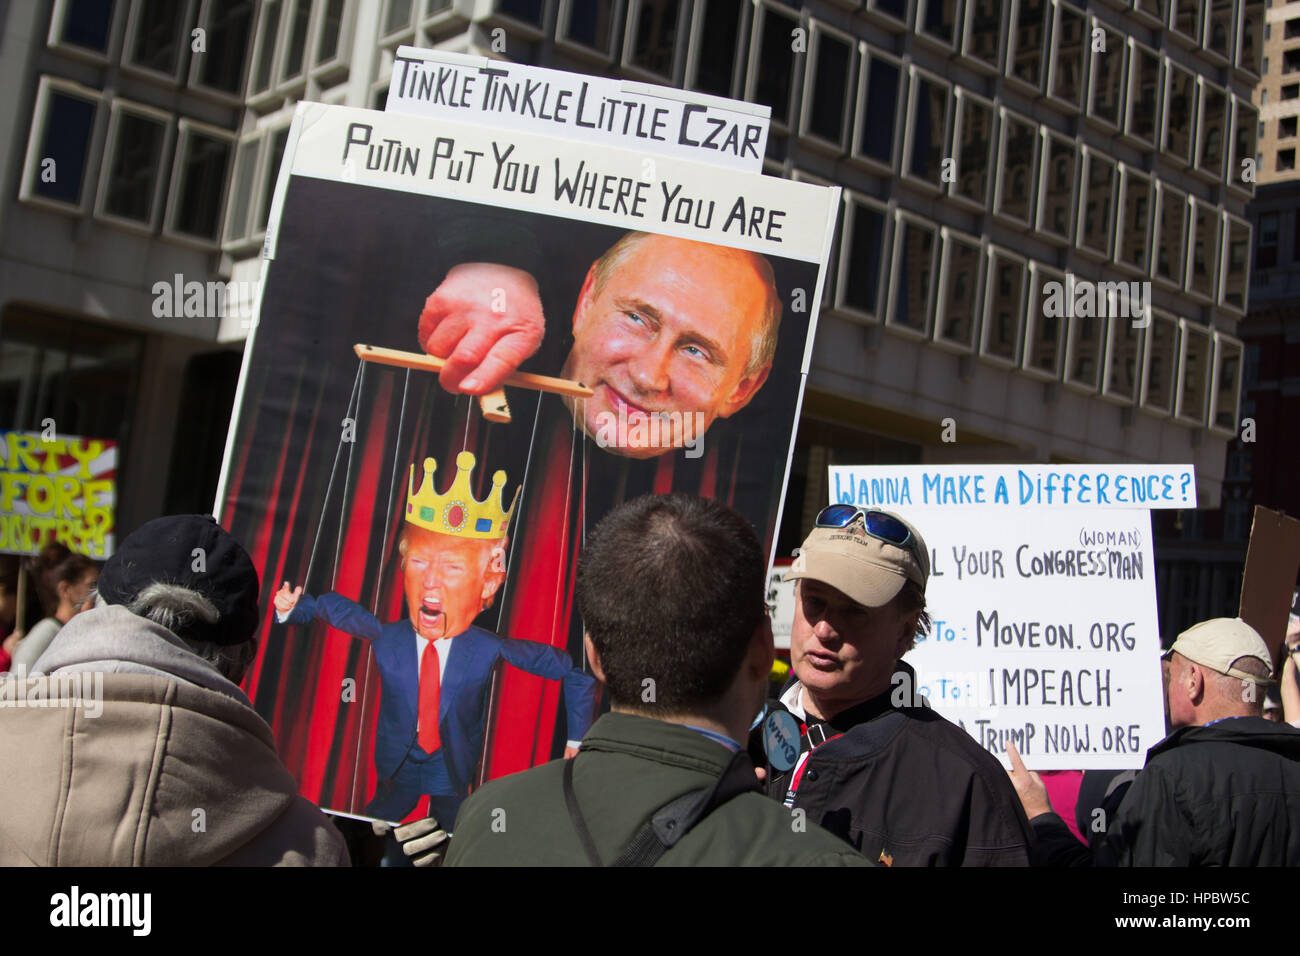 Philadelphia, USA. 20th February, 2016. Protestors gather at Thomas Paine Plaza across from Philadelphia CIty Hall, Monday, February 20, 2017. Part of a nationwide 'Not My President' mobilization coinciding with the national holiday celebrating George Washington's birthday, they voiced concerns about President Donald Trump's executive actions on immigration, the environment and other issues. Credit: Michael Candelori/Alamy Live News Stock Photo